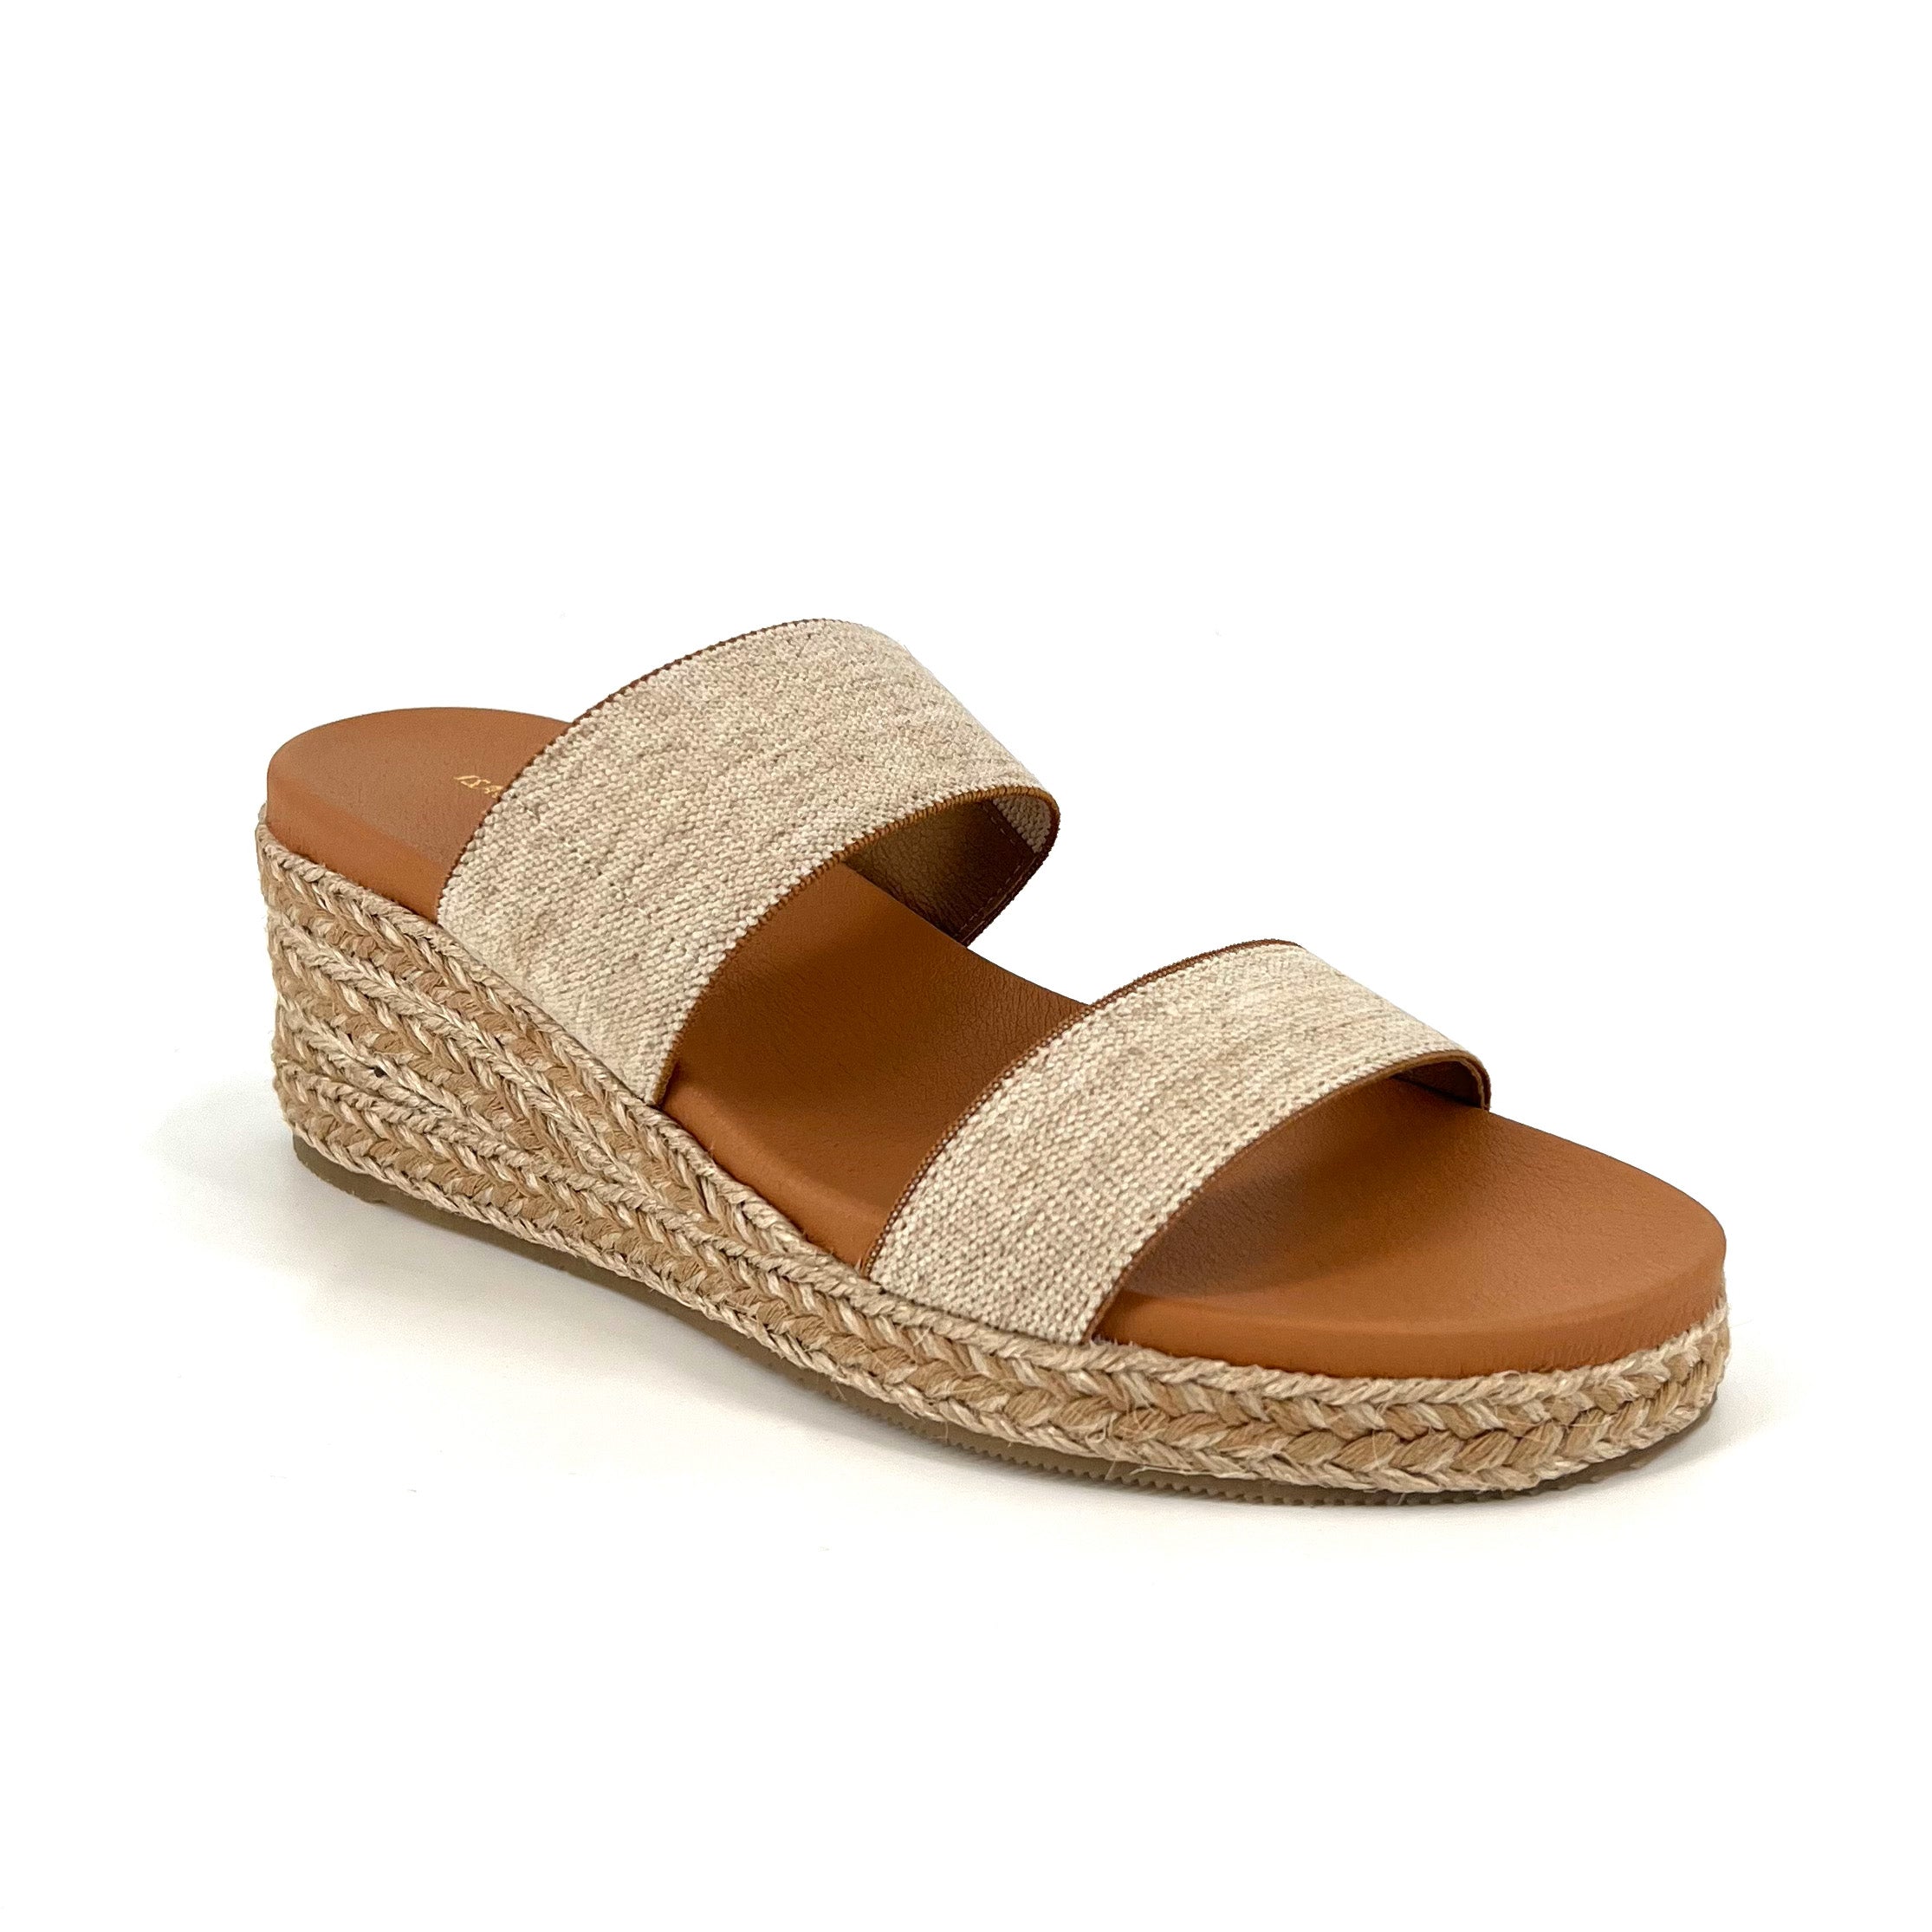 The Elastic 2 Band Espadrille in Natural Linen